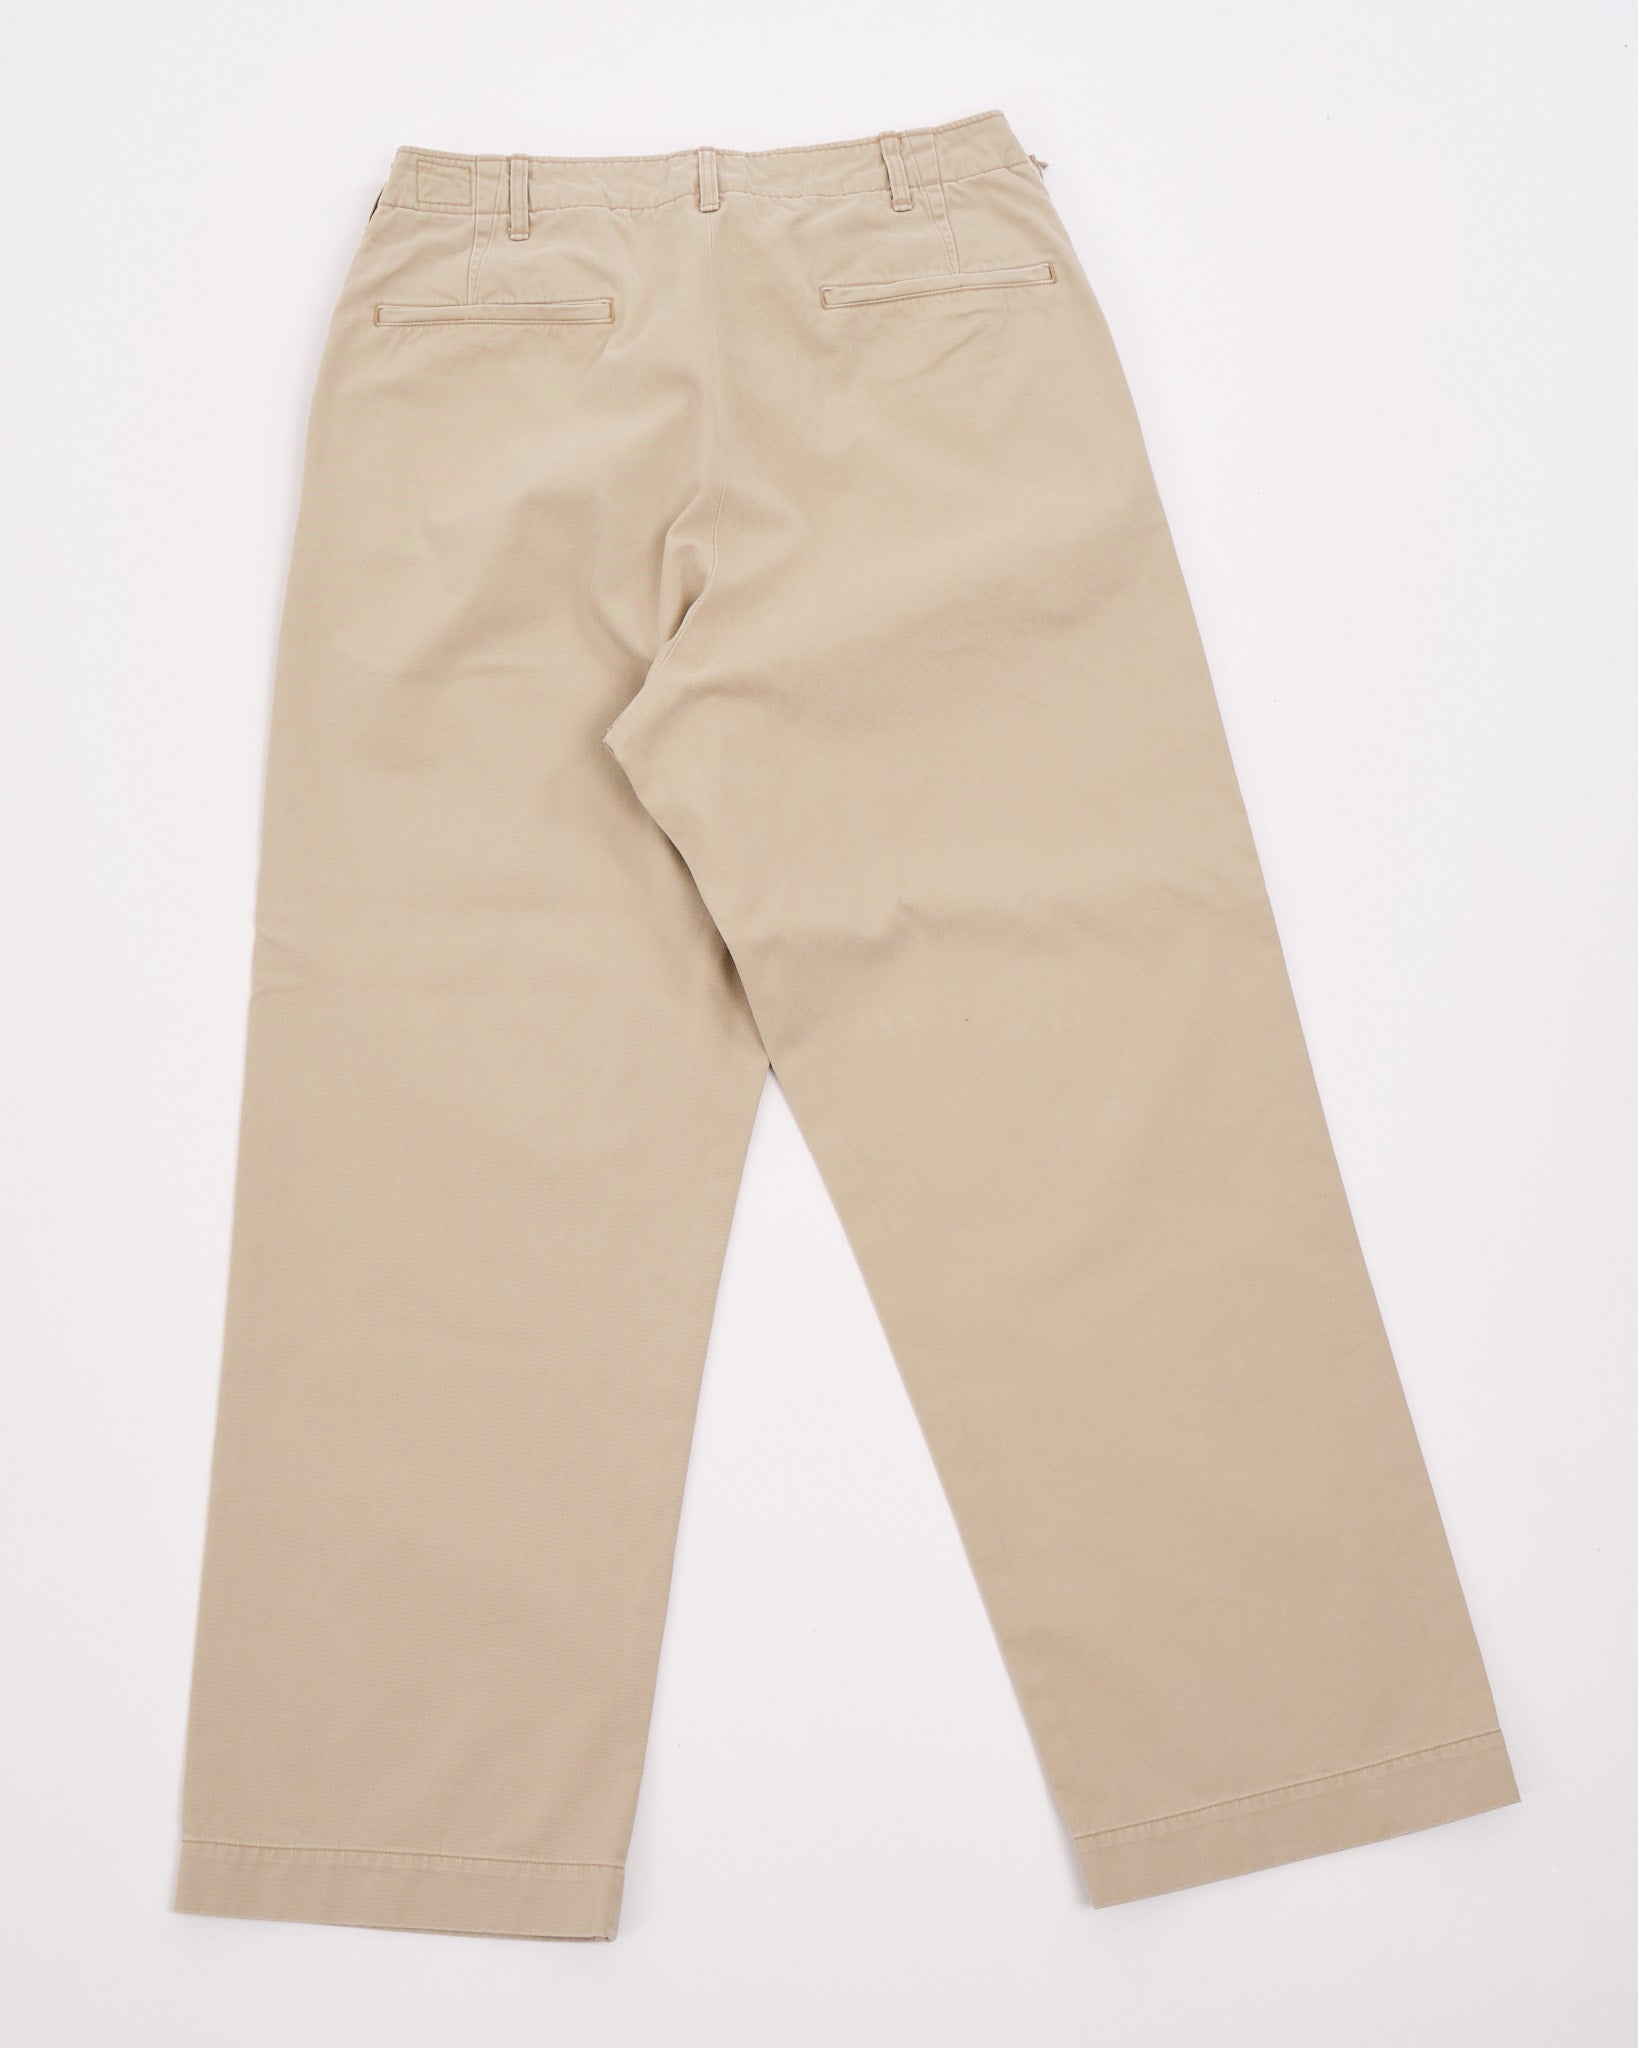 orSlow  VINTAGE FIT ARMY TROUSER IN KHAKI STONE – RELIQUARY